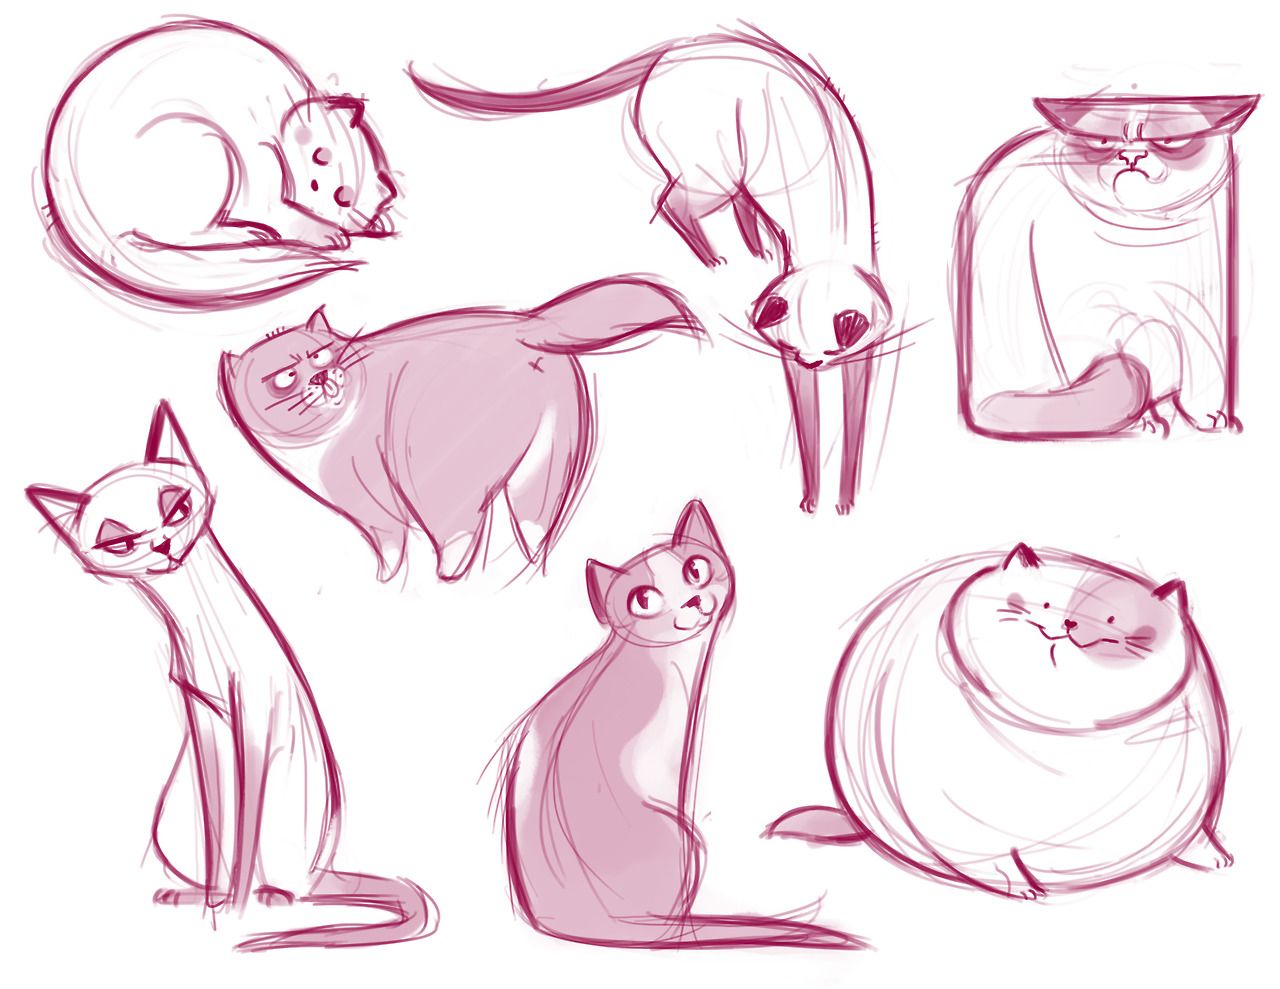 Daily Cat Drawings Your daily cat illustration fix